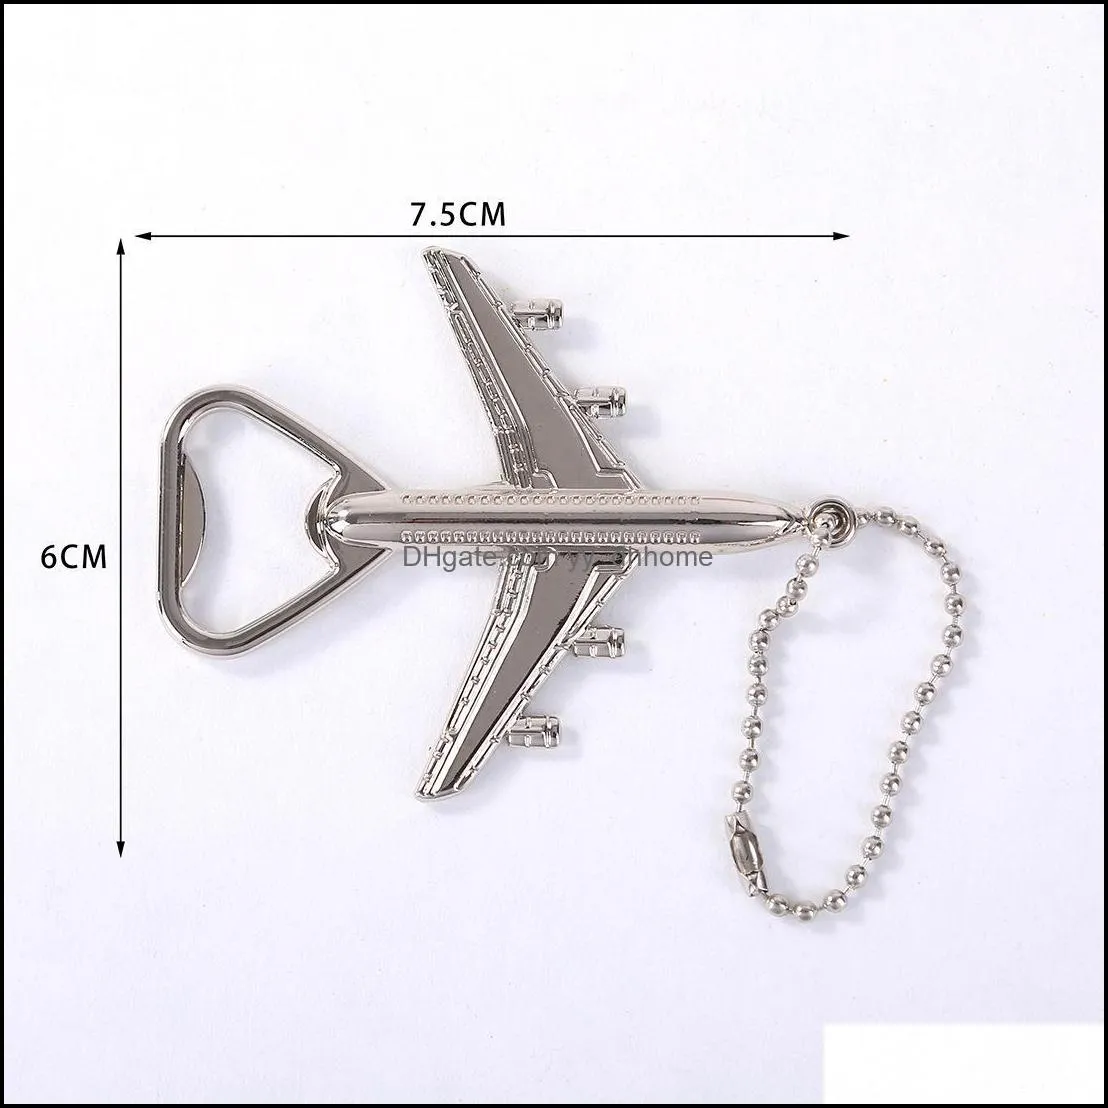 ups retro airplane beer bottle opener aircraft keychain alloy plane shape opener keyring wedding gift party favors kitchen tools